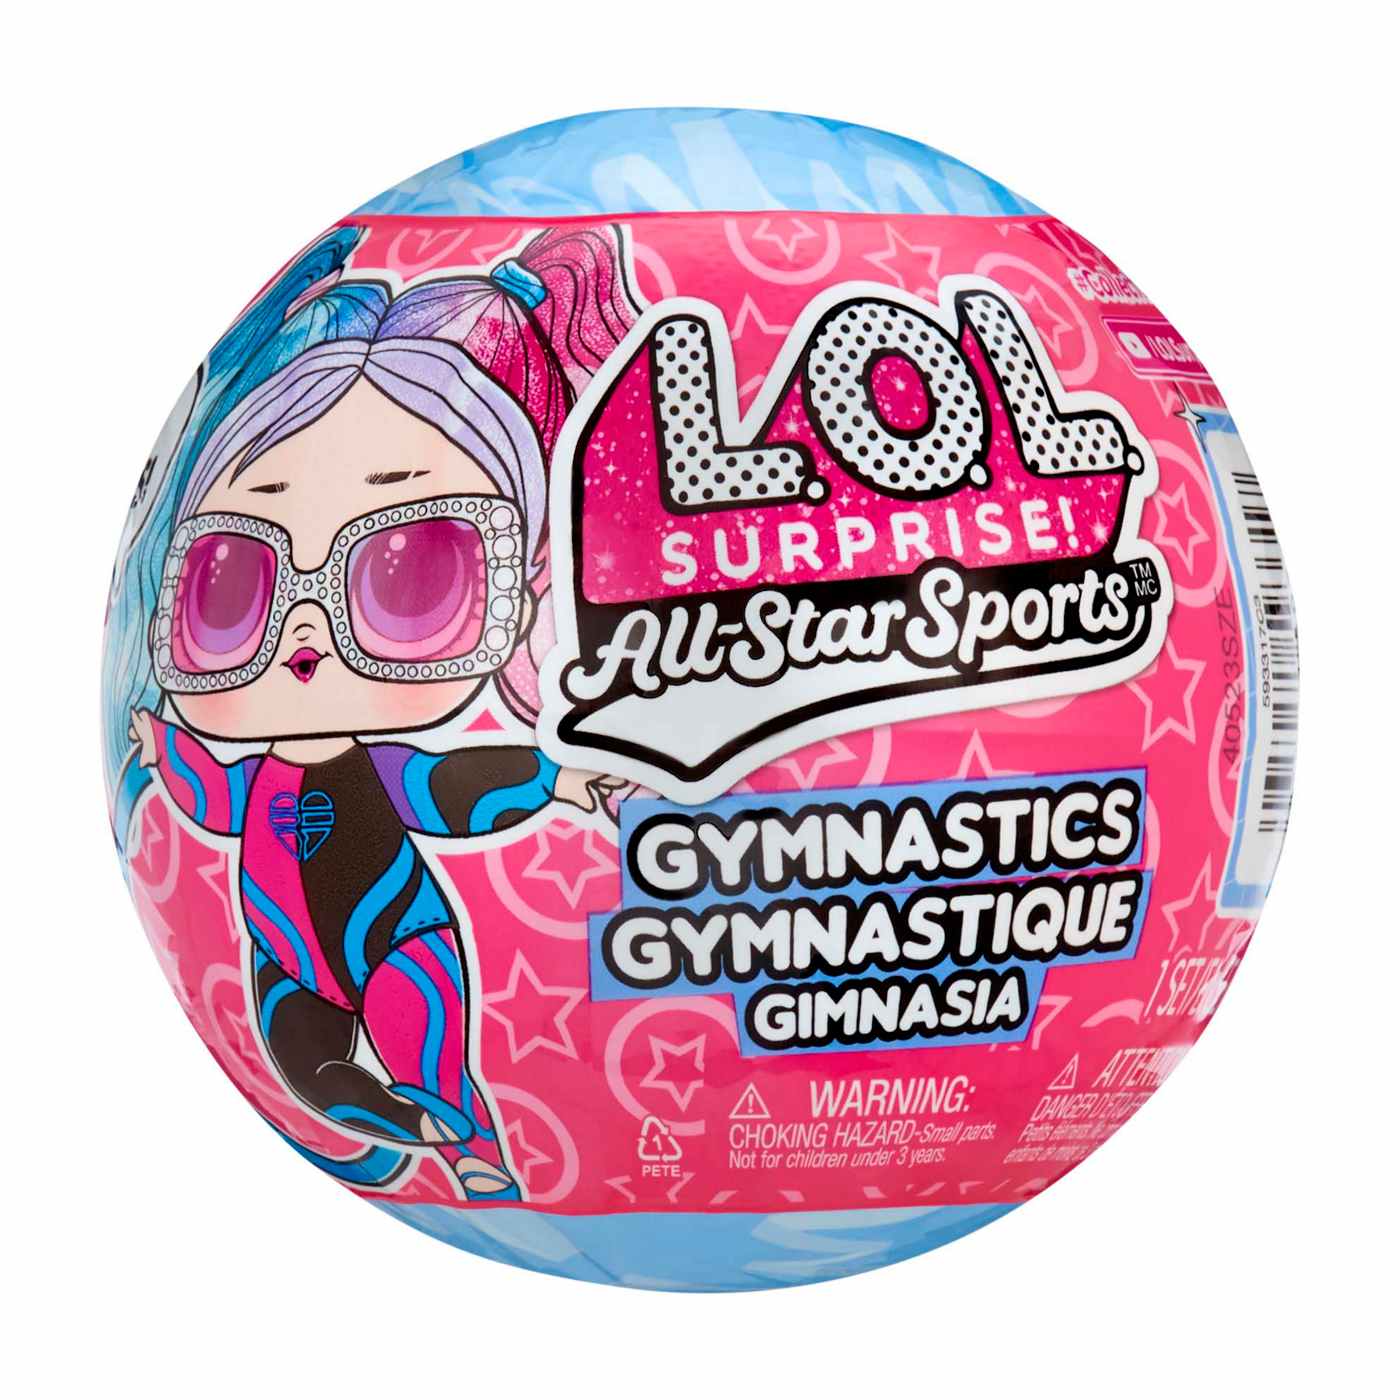 L.O.L. Surprise! All-Star Sports Gymnastics Capsule; image 1 of 5